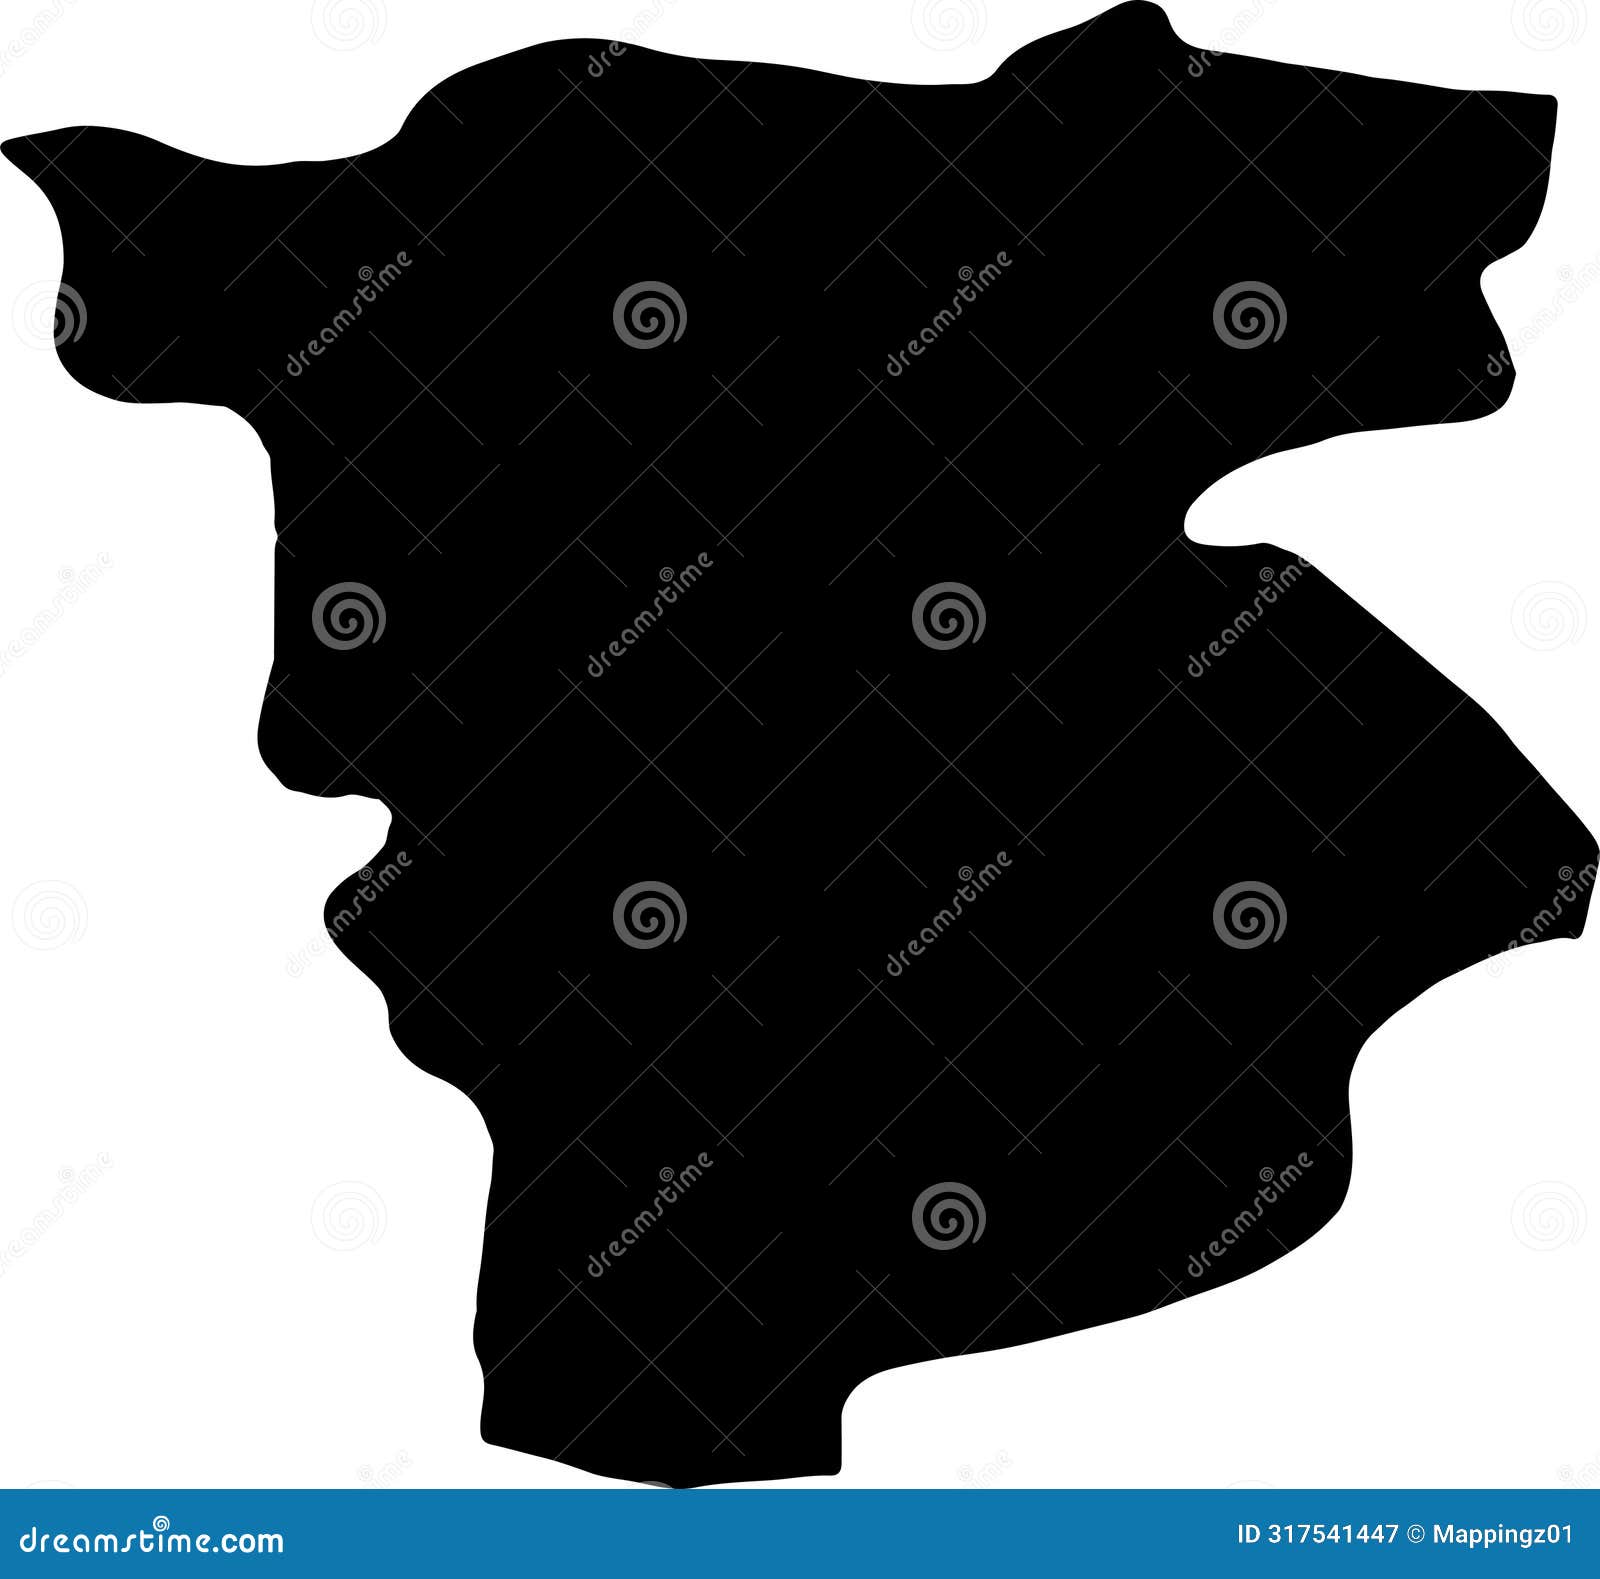 mila algeria silhouette map with transparent background